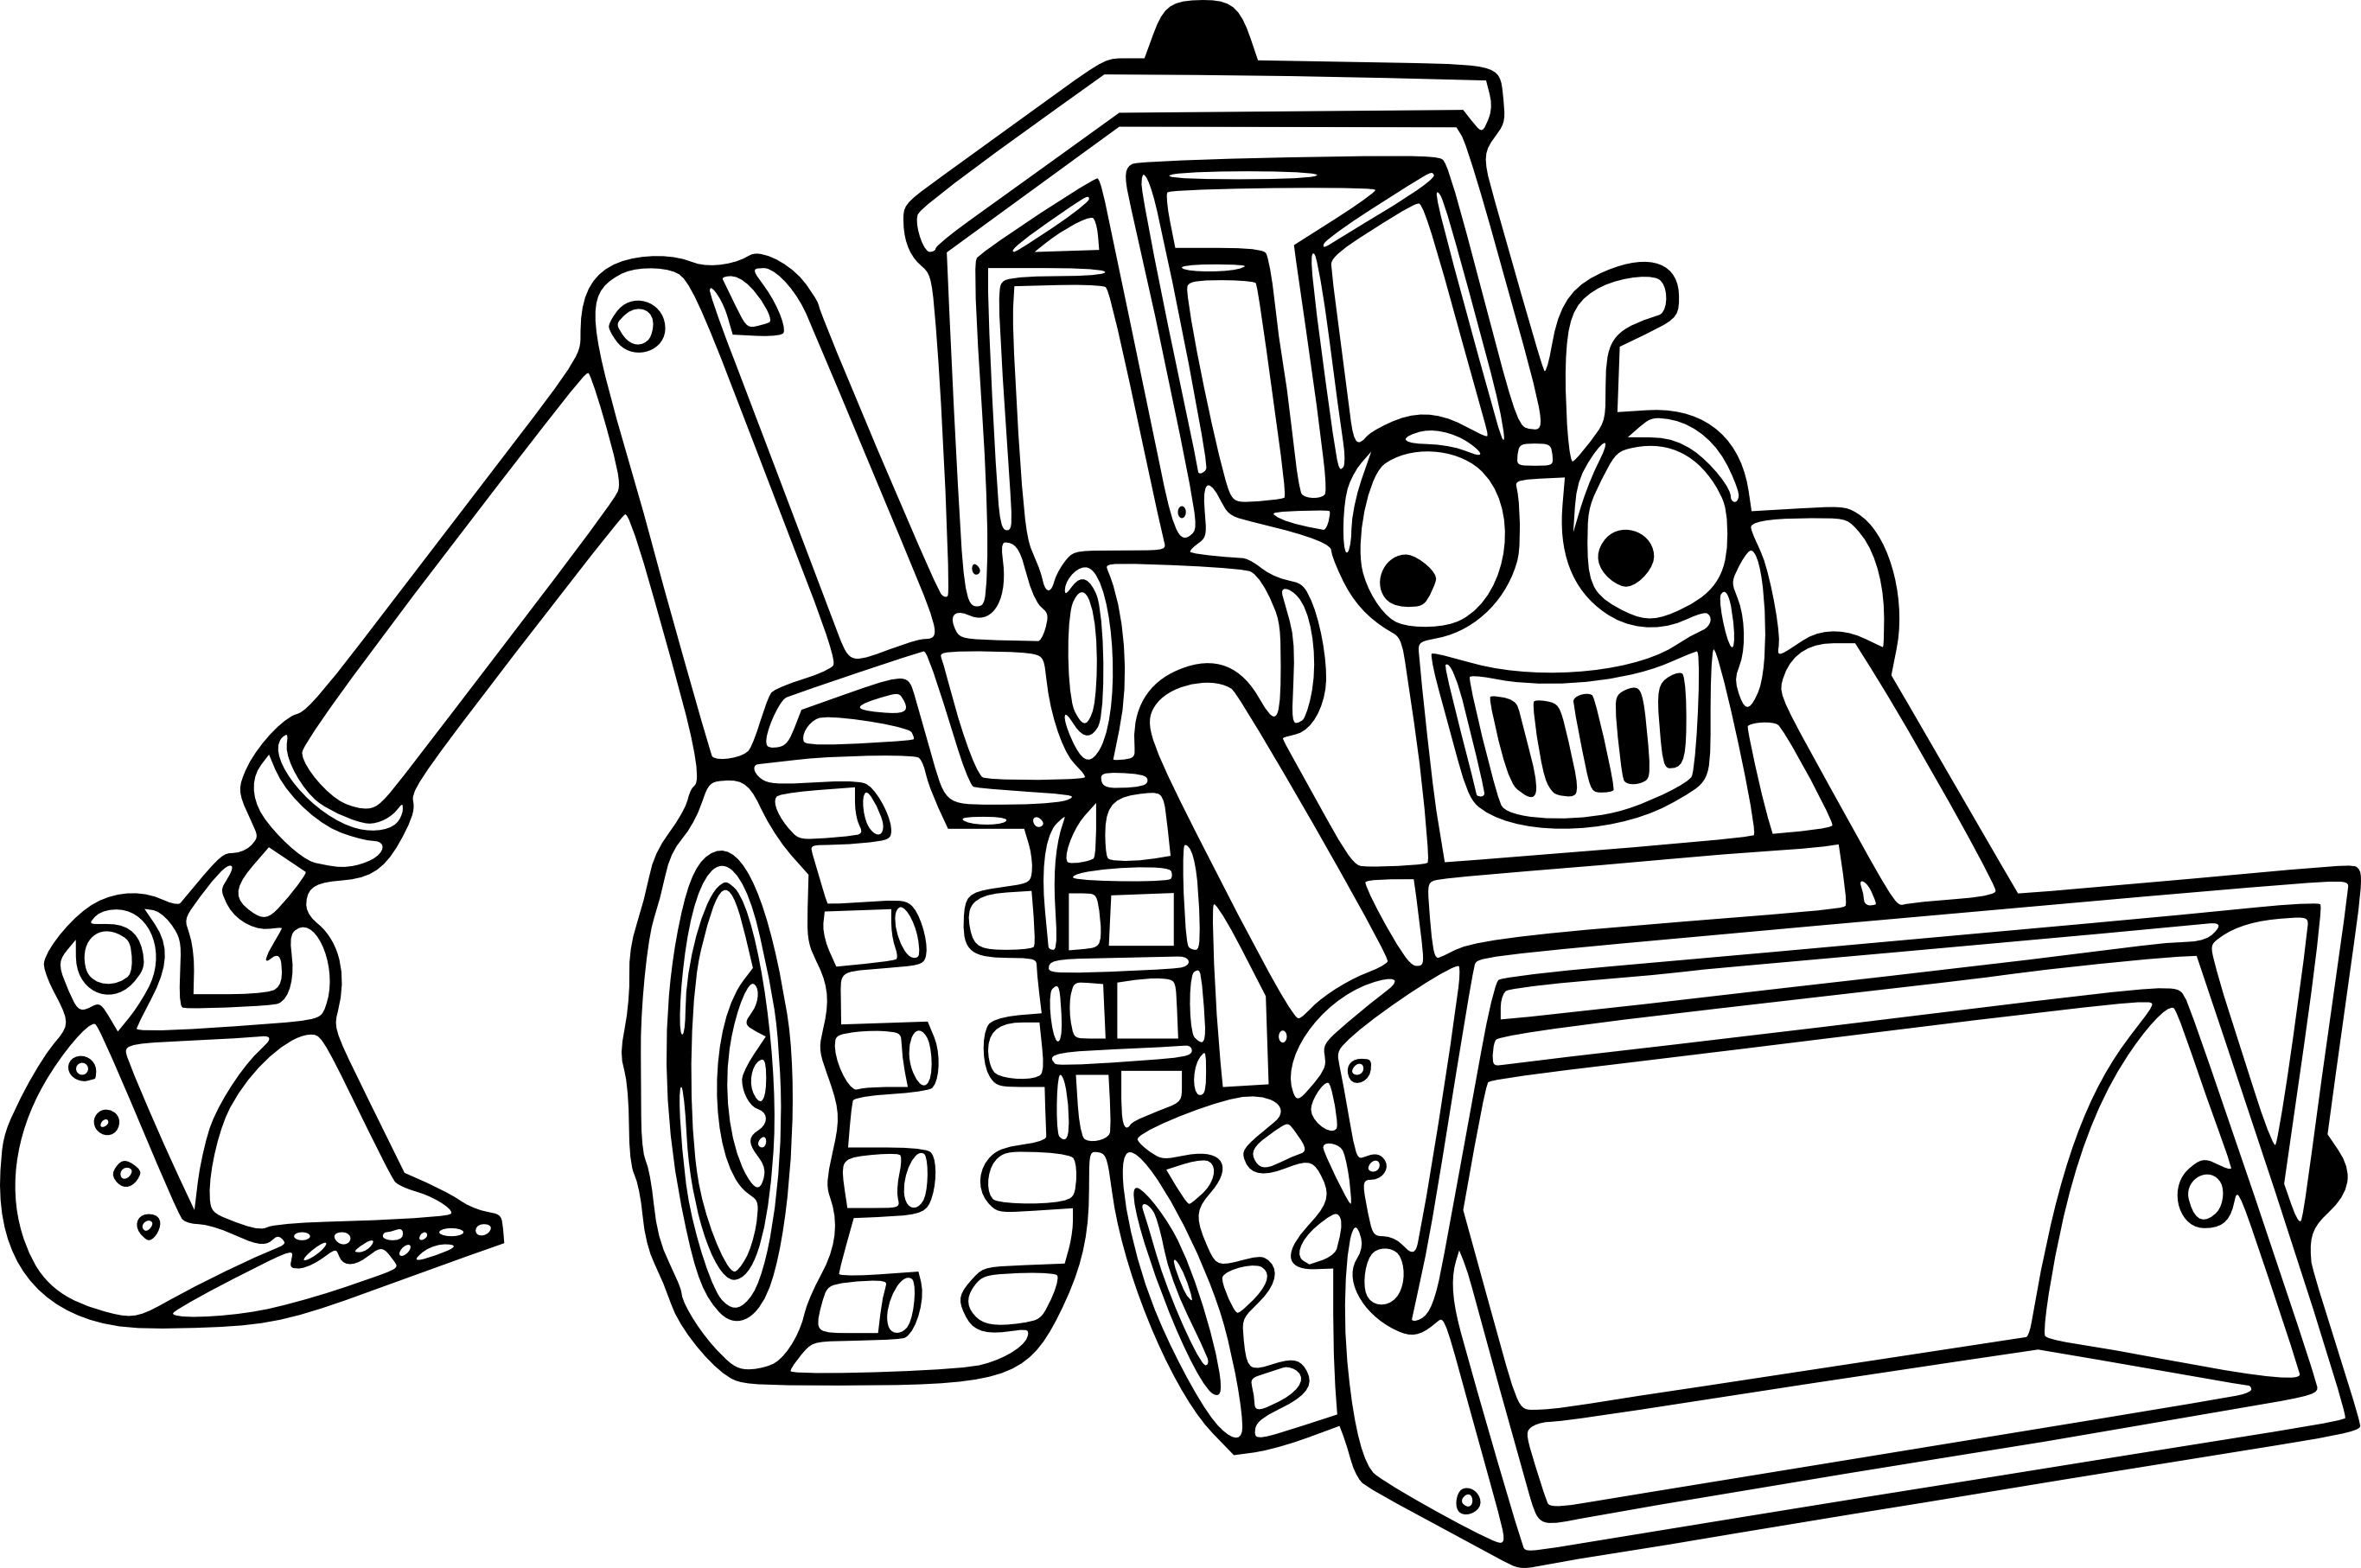 Backhoe coloring page